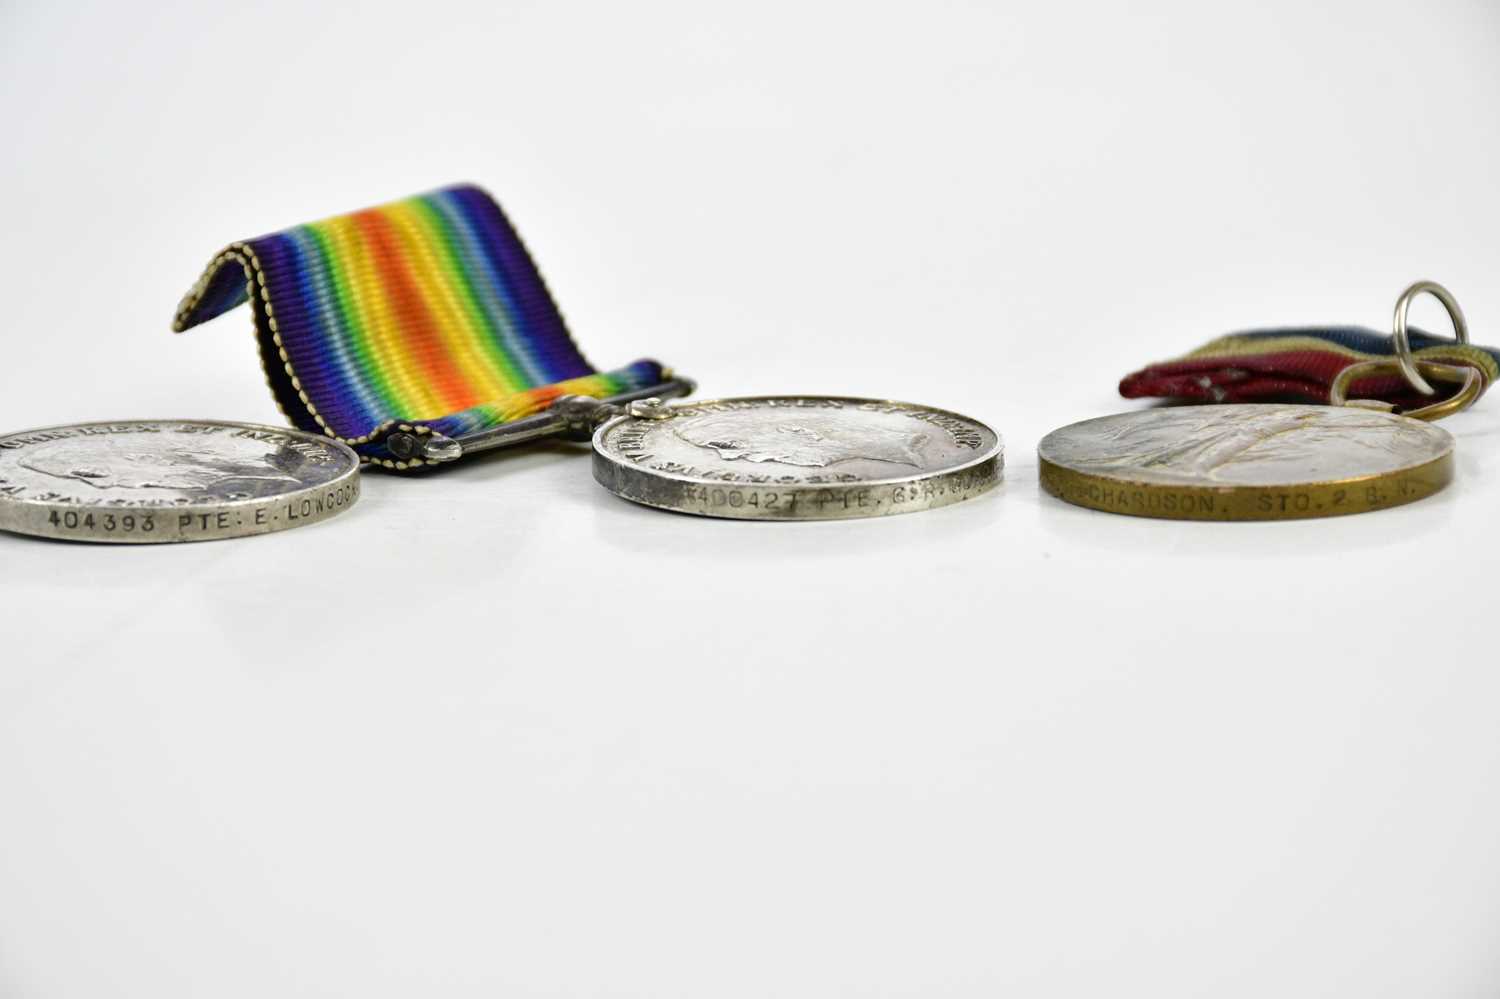 Two WWI British War Medals, awarded to 400427 Pte G.R. Goddard Manch R, and to 404393 Pte E. Lowcock - Image 3 of 3